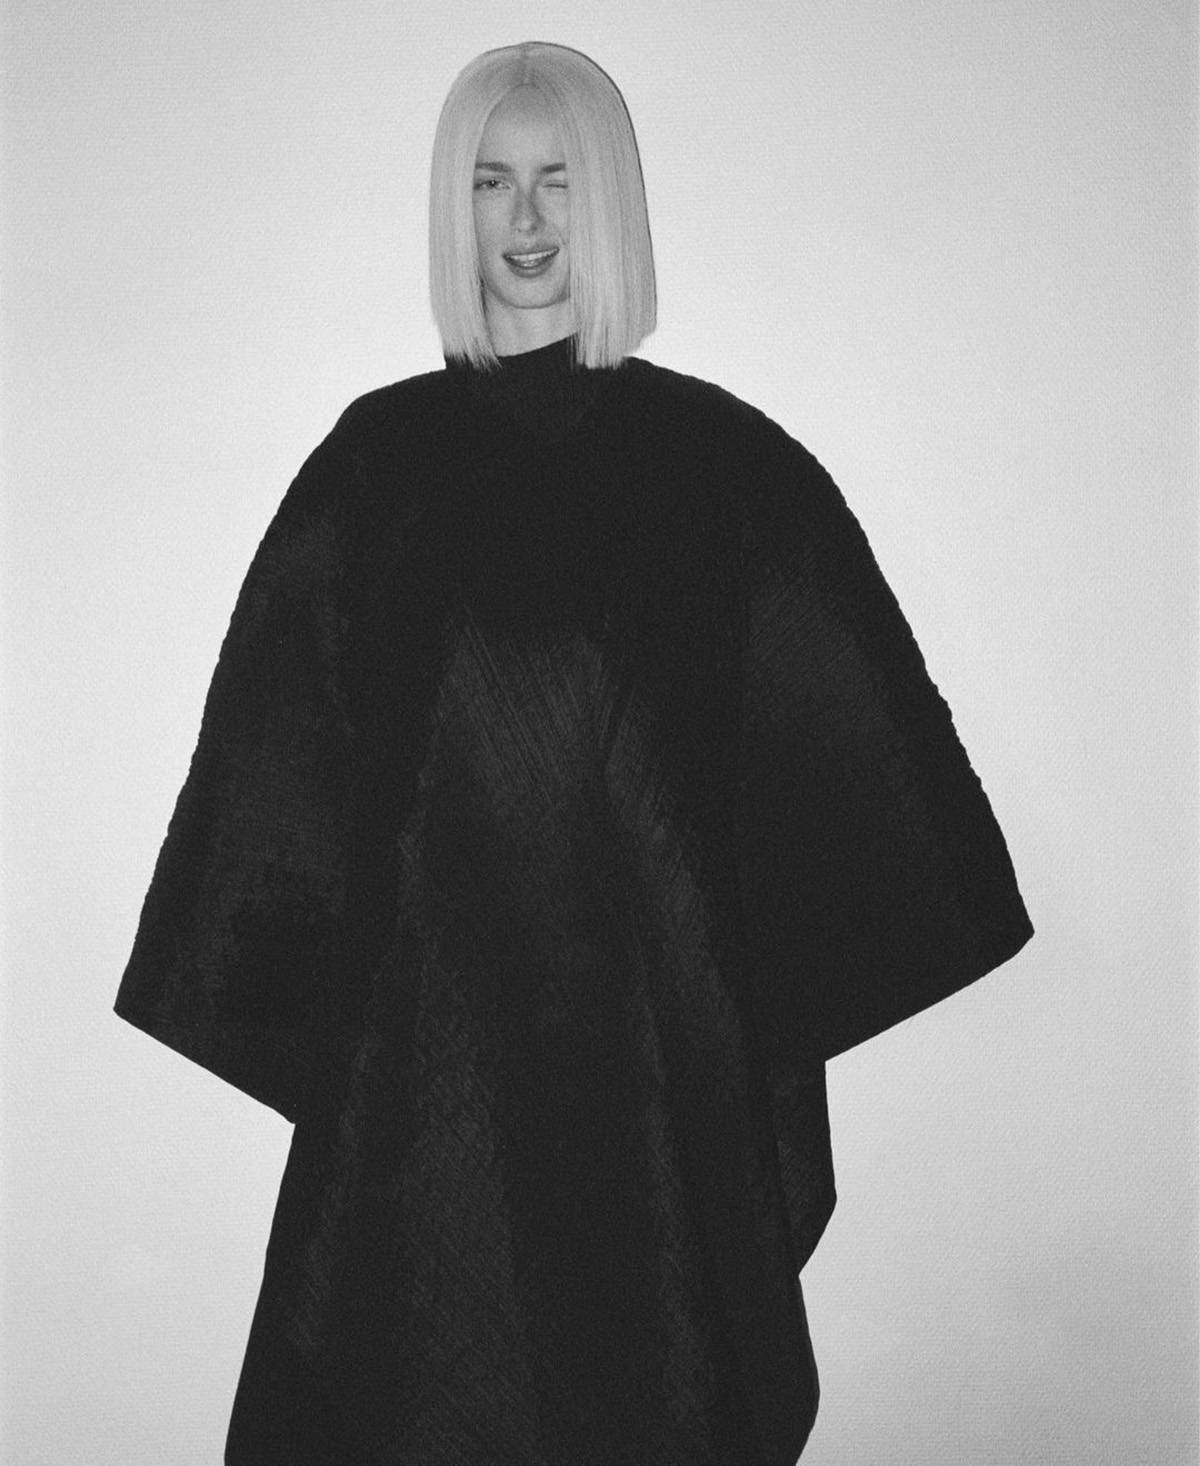 Clothing: Pleated polyester cape by Pleats Please Issey Miyake. Model: Rianne van Rompaey. Photographer: Henrik Purienne. Hair Stylist: Damien Boissinot. Makeup Artist: Christelle Cocquet